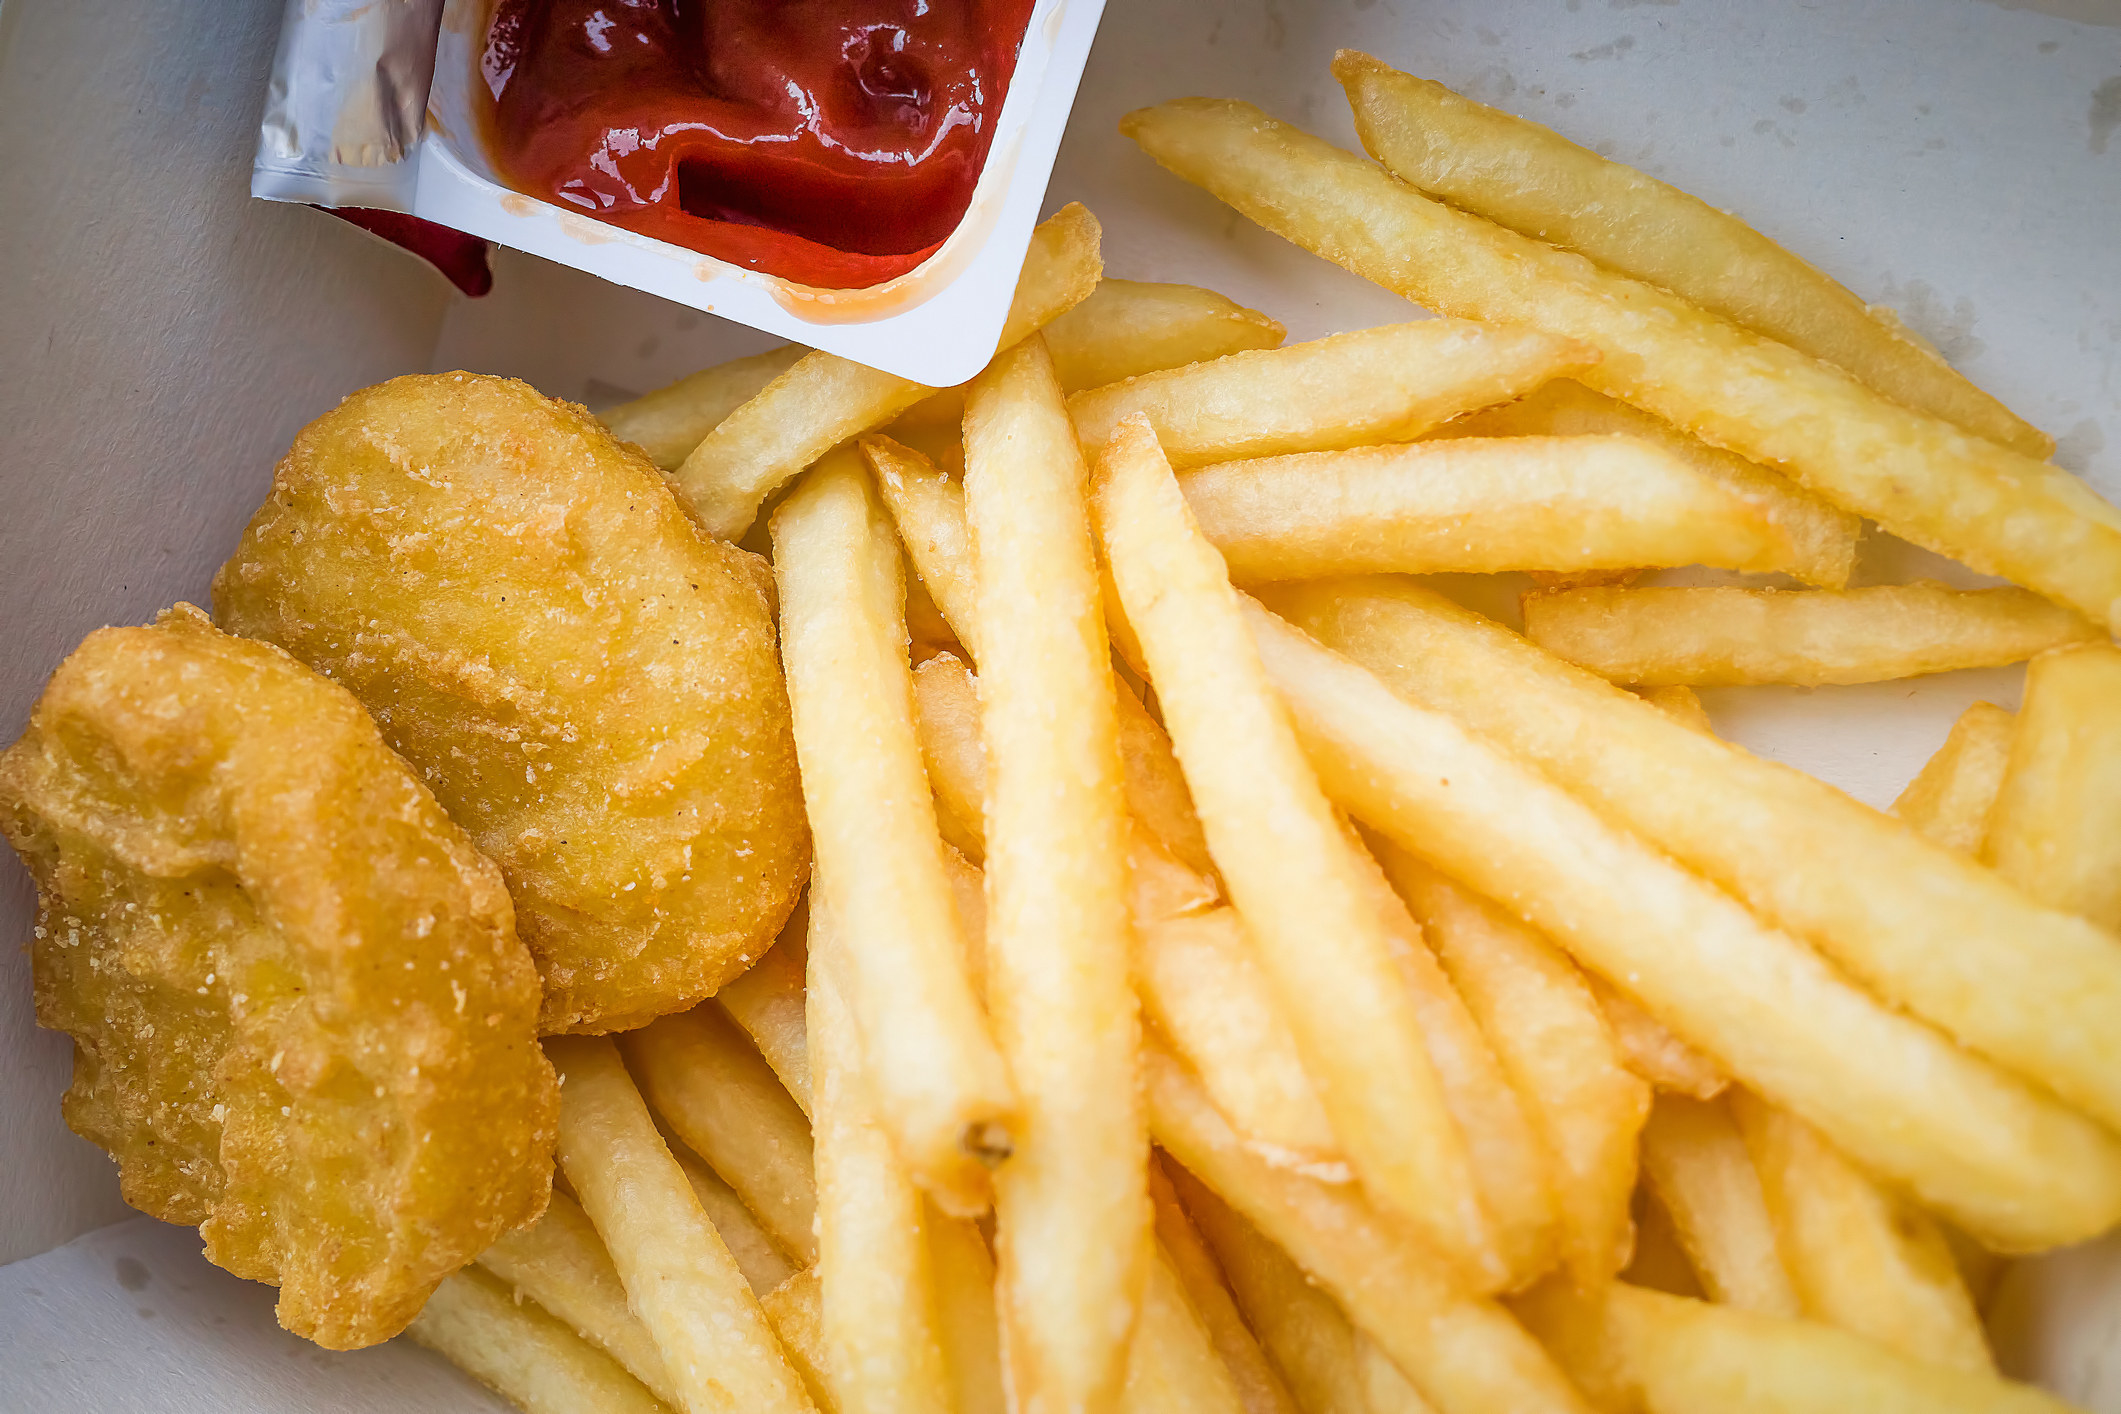 Chicken nuggets and fries with ketchup.